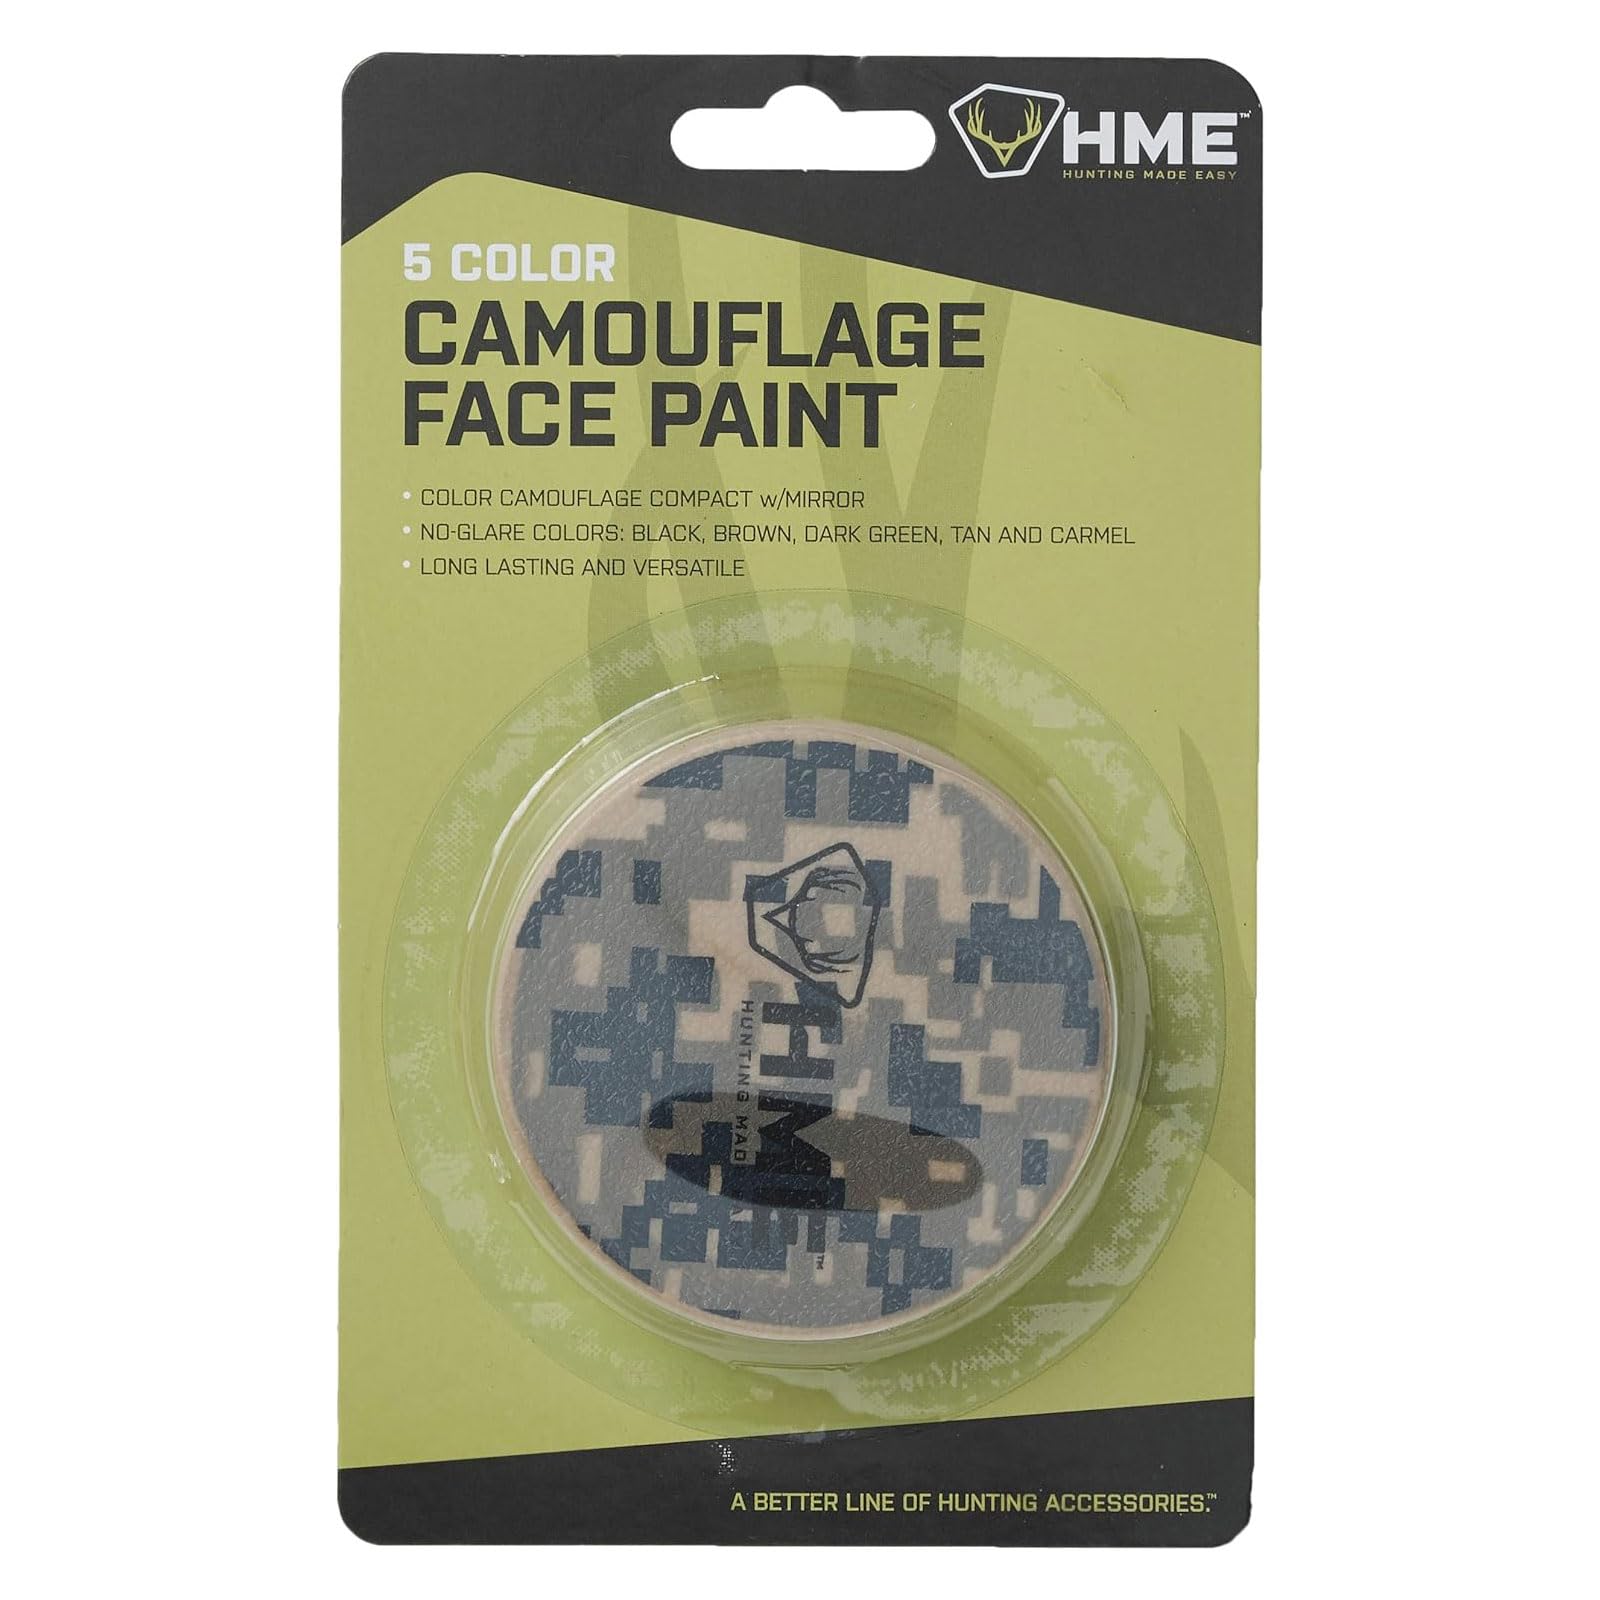 HME Camo Face Paint Kit with Mirror - Long-Lasting Non-Glare Easy-to-Use Concealment Makeup for Hunting in Compact Case, 5 Colors